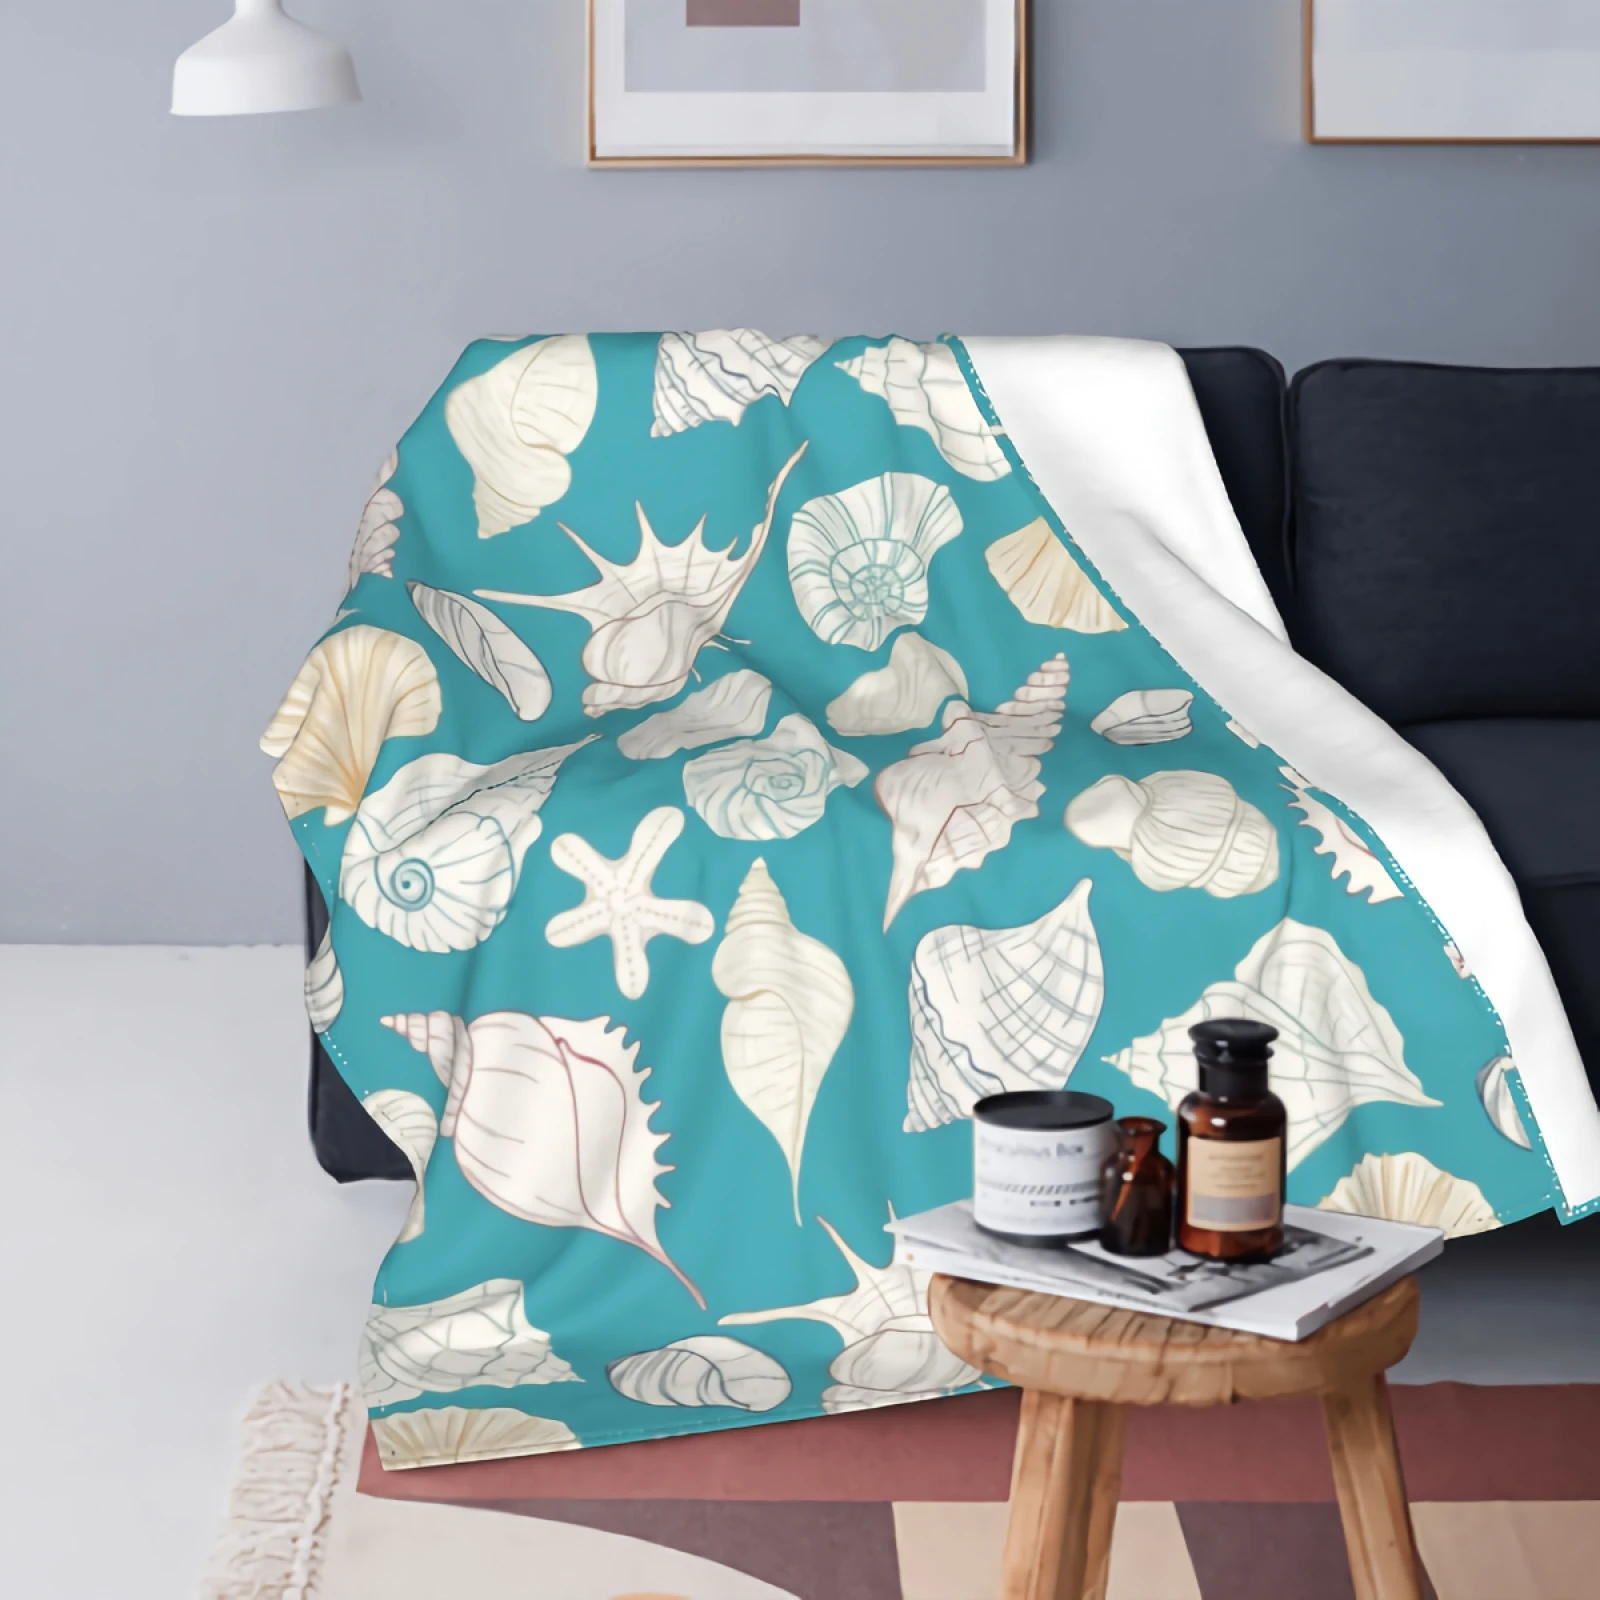 

Marine Pattern With Shells Throw Blanket Starfish And Seashell Background Ultra Soft Flannel Blanket Bedding